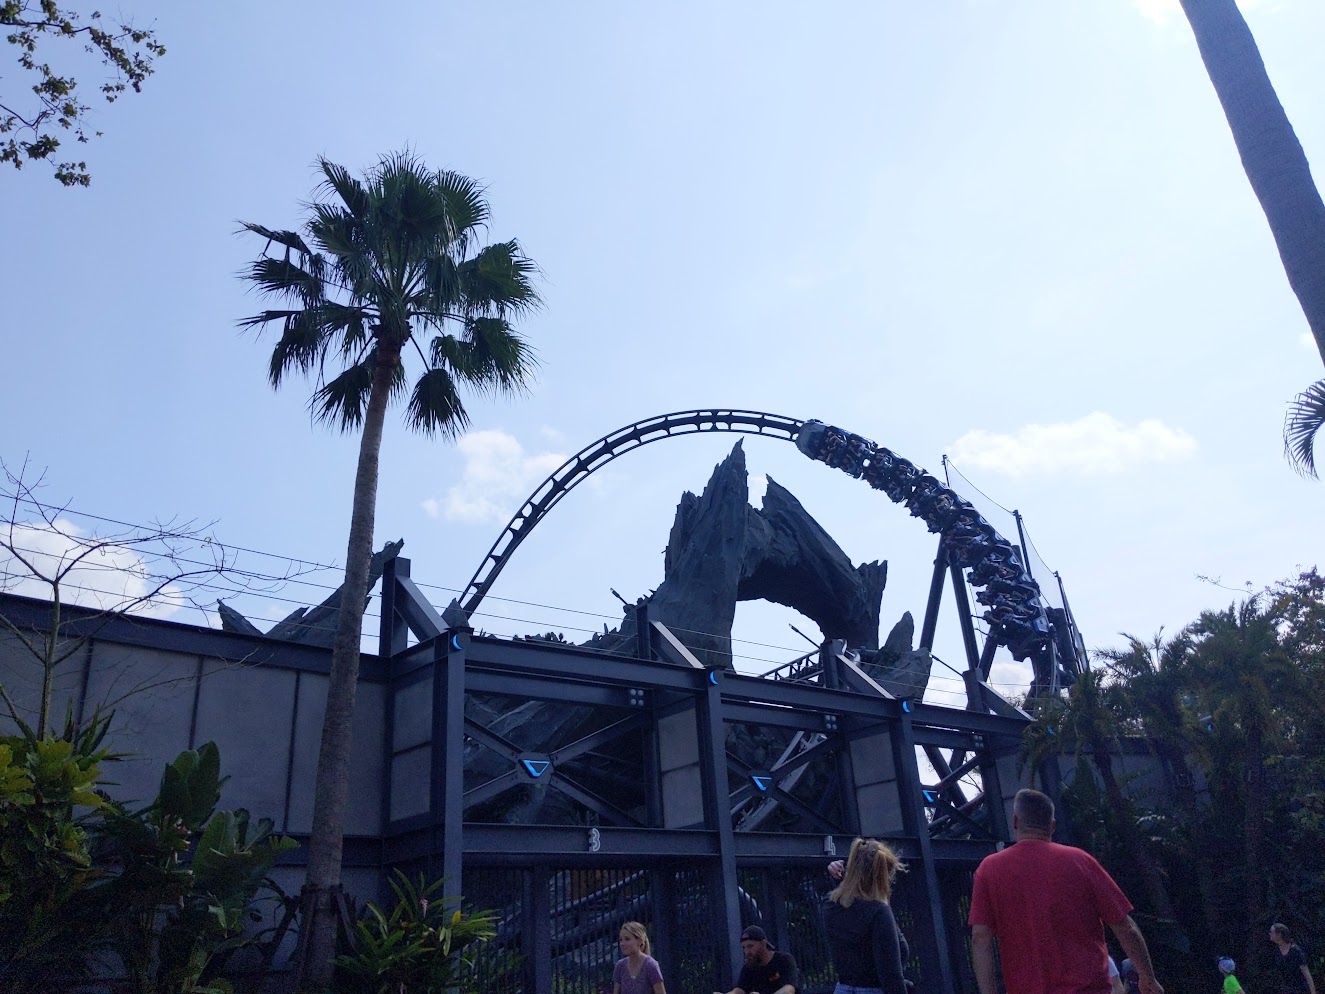 Velocicoaster's train cresting over the mountain in the paddock section of the ride